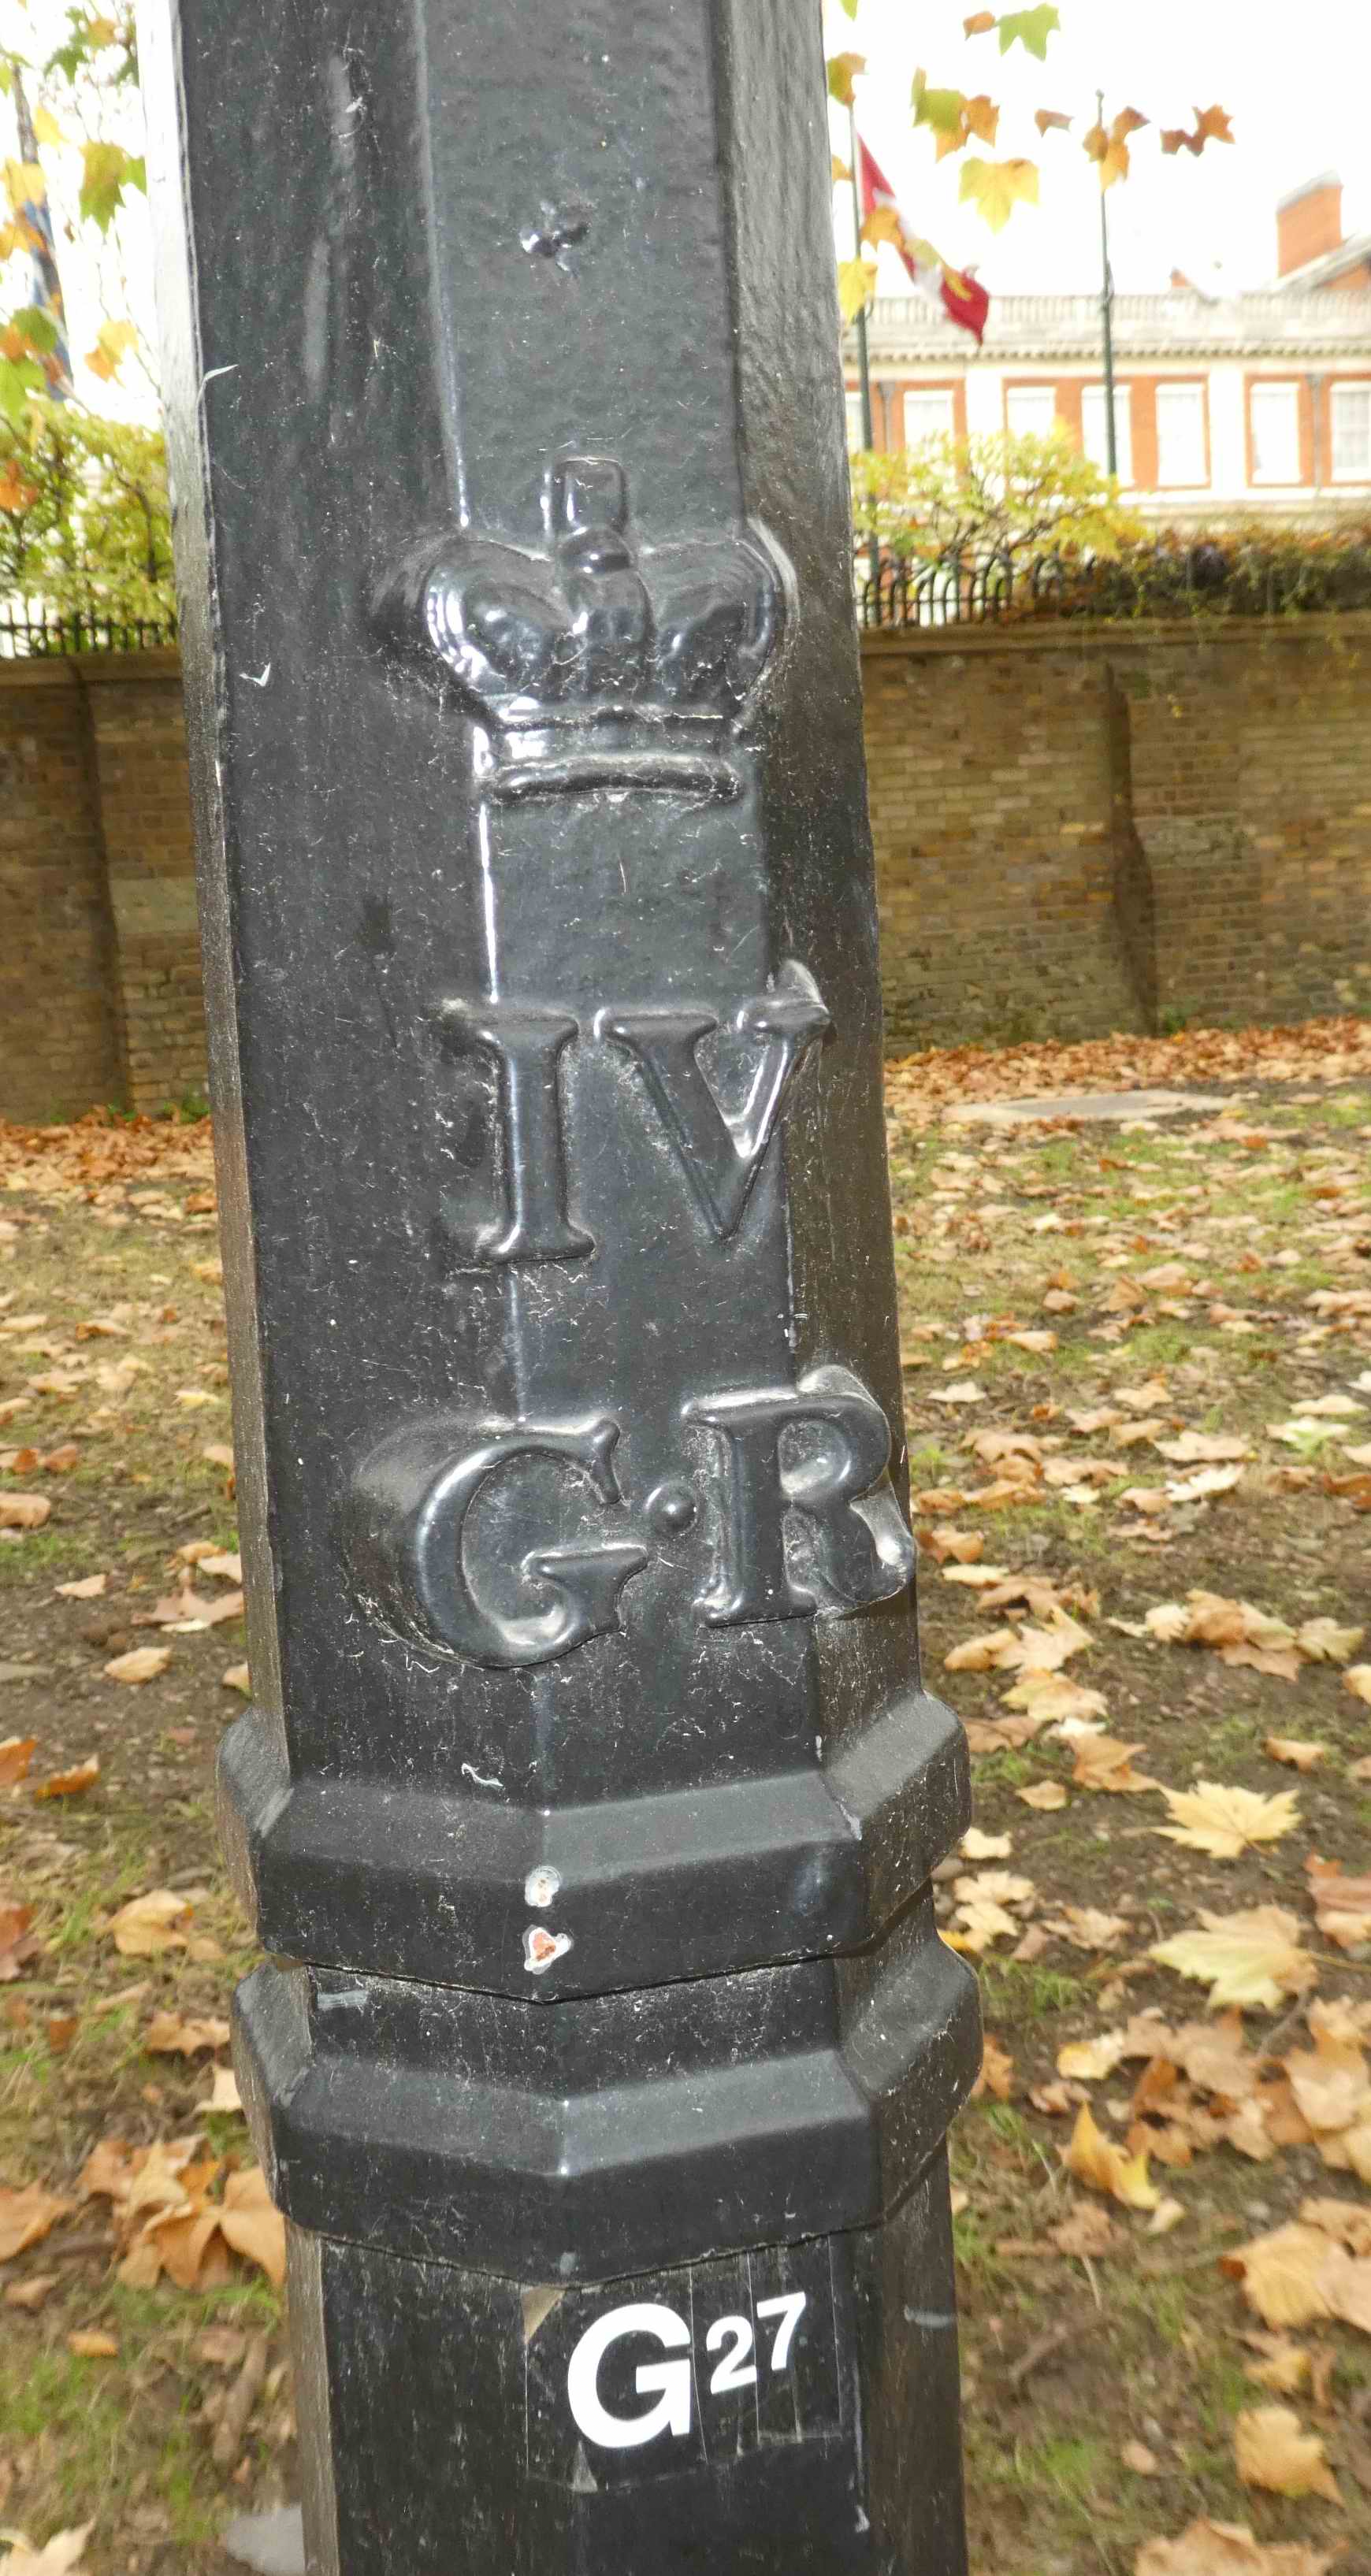 Light installed in reign of George IV